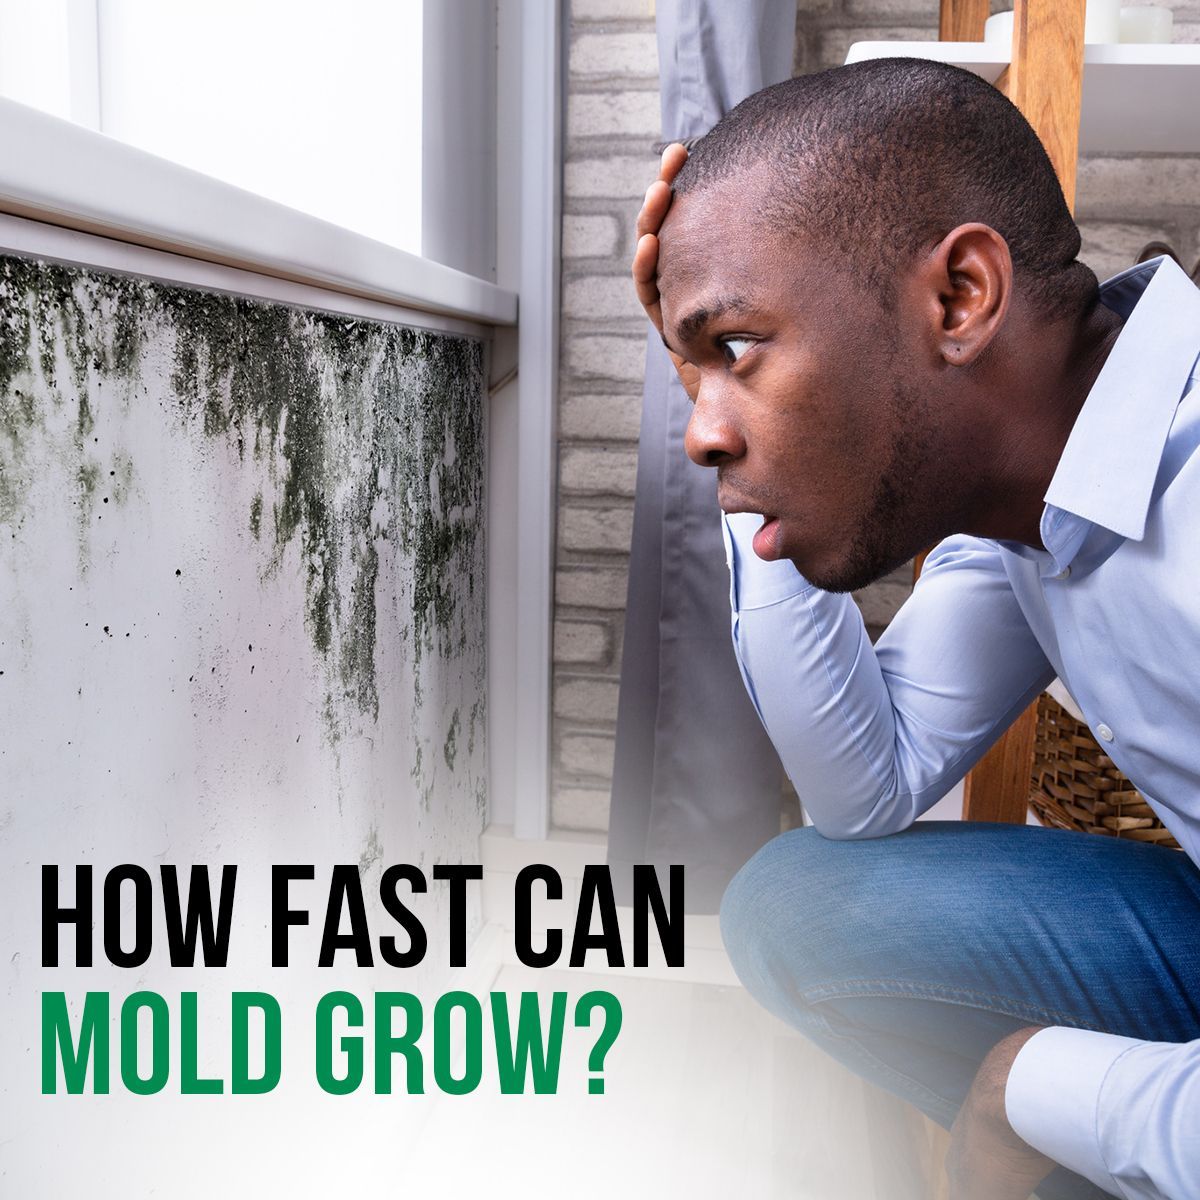 How Fast Can Mold Grow?